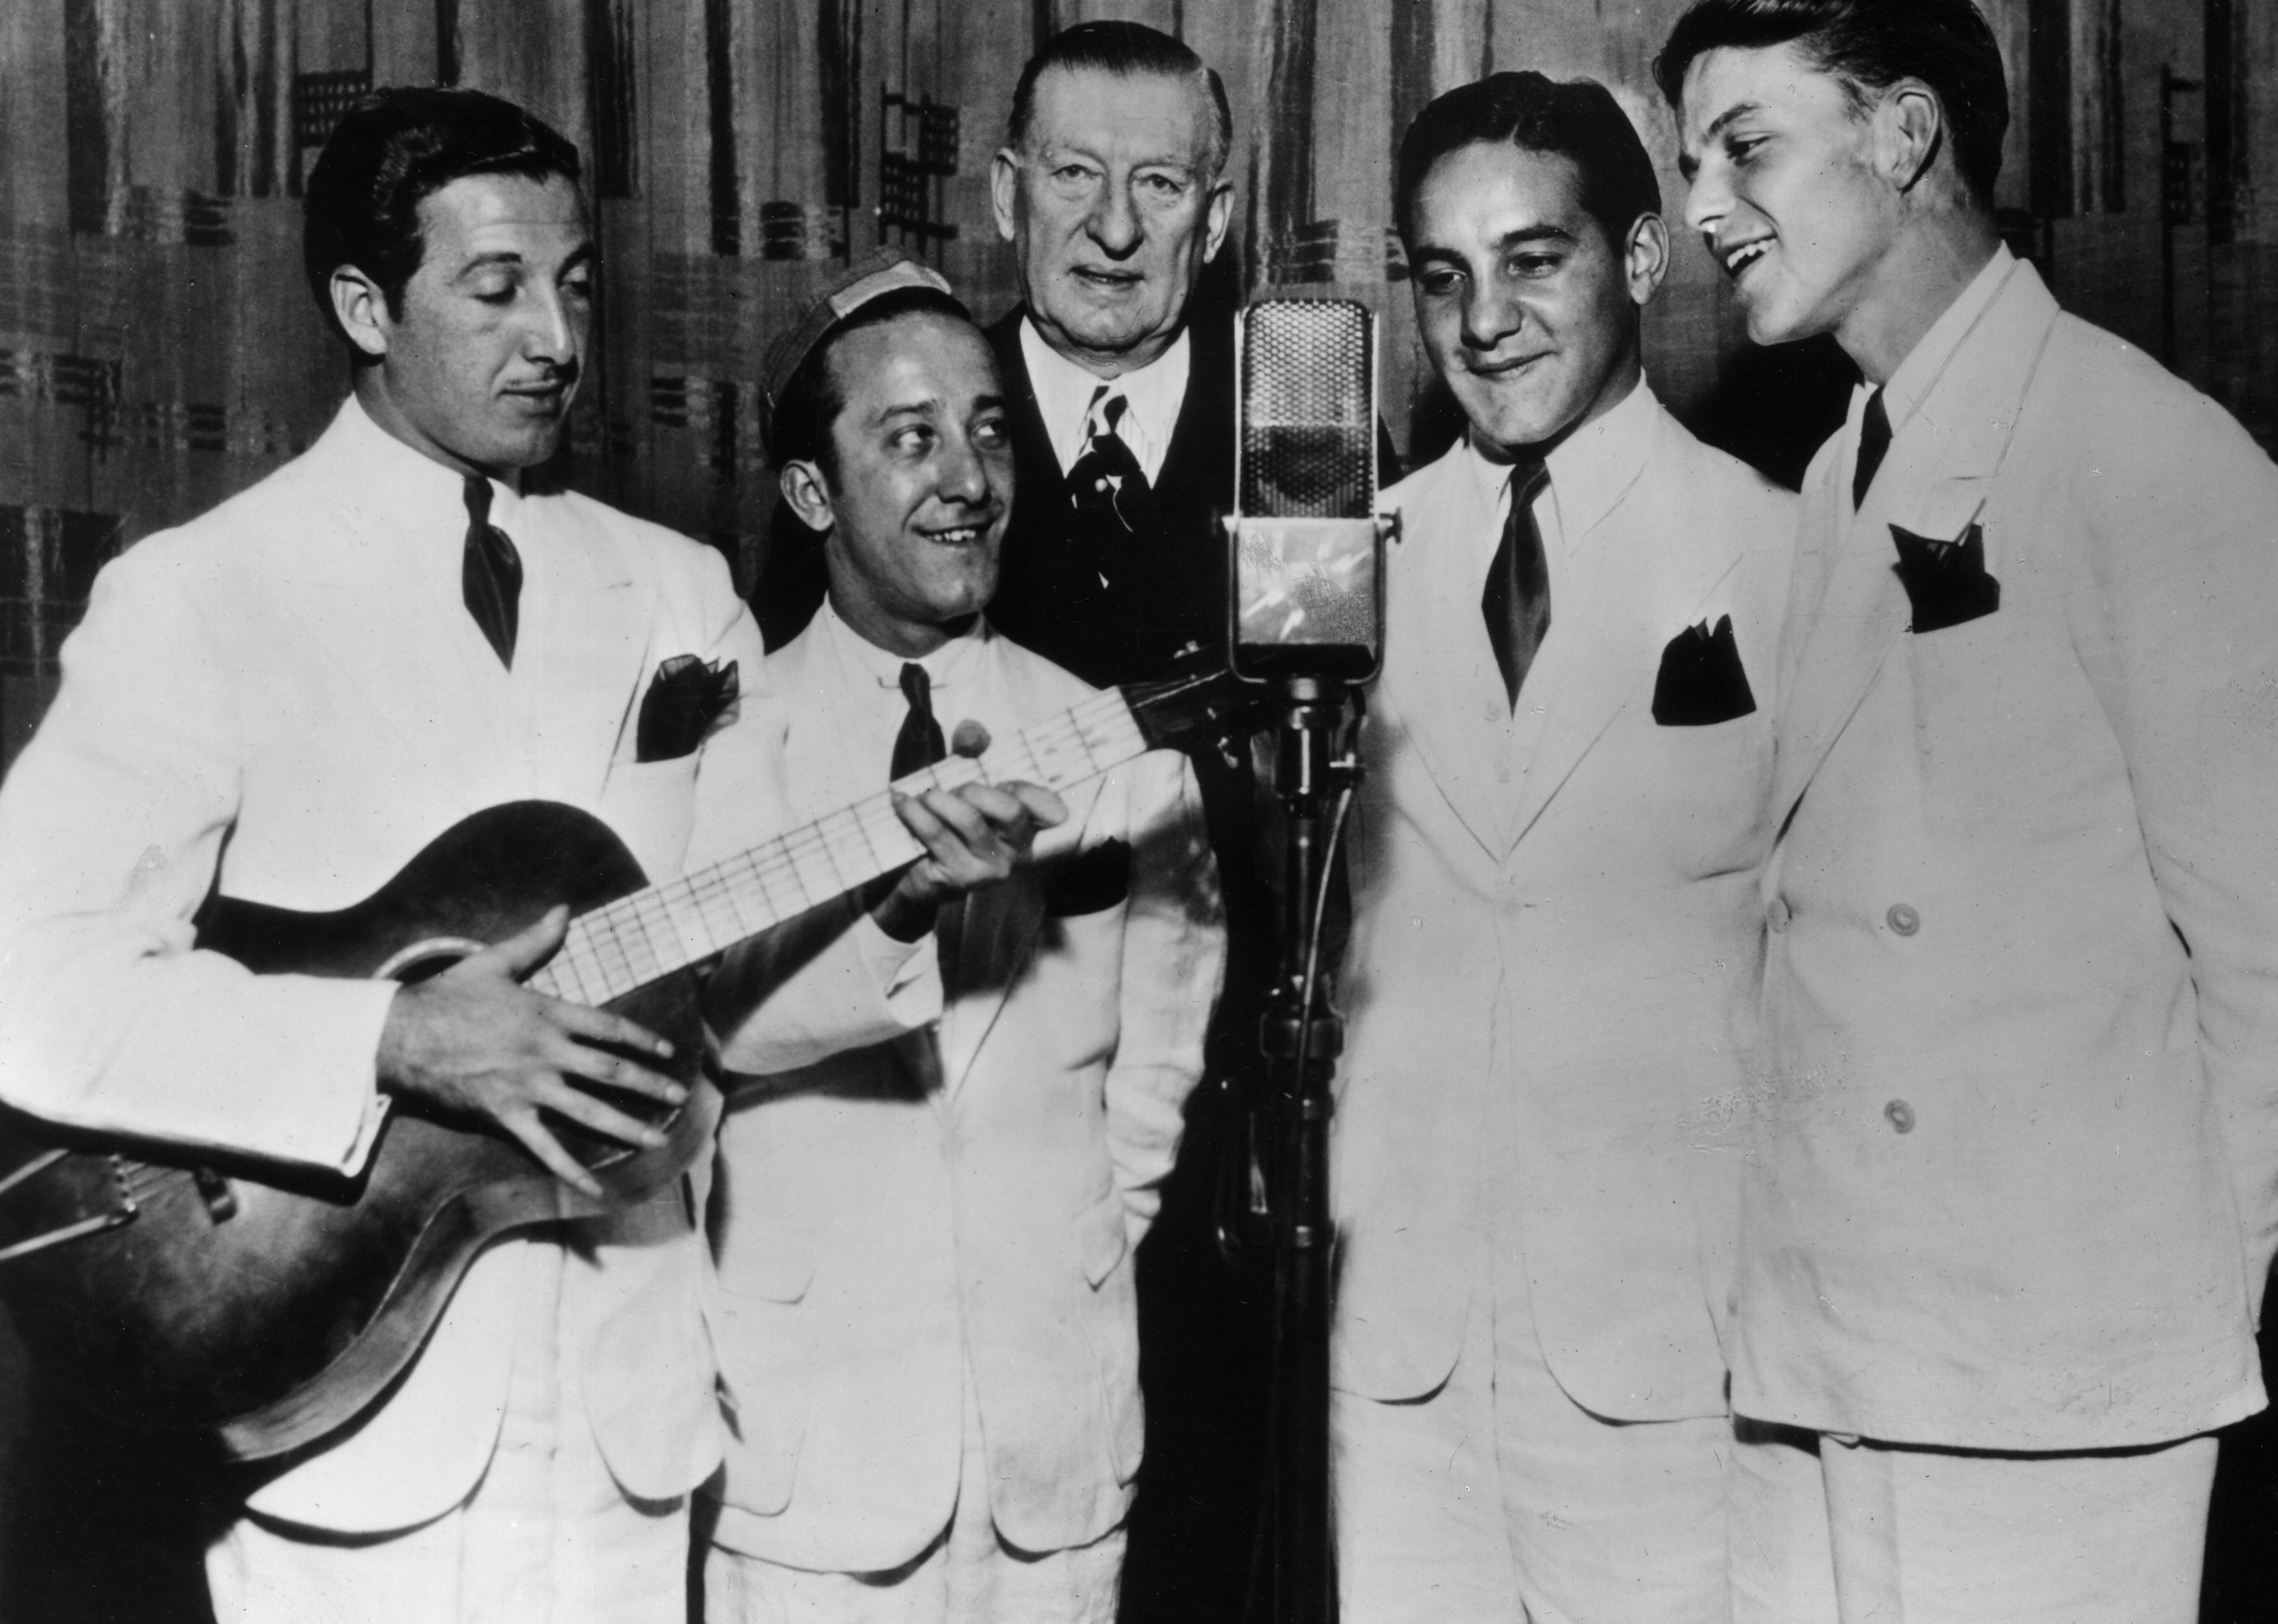 Frank Sinatra singing with The Hoboken Four on 'The Amateur Hour ' radio show.